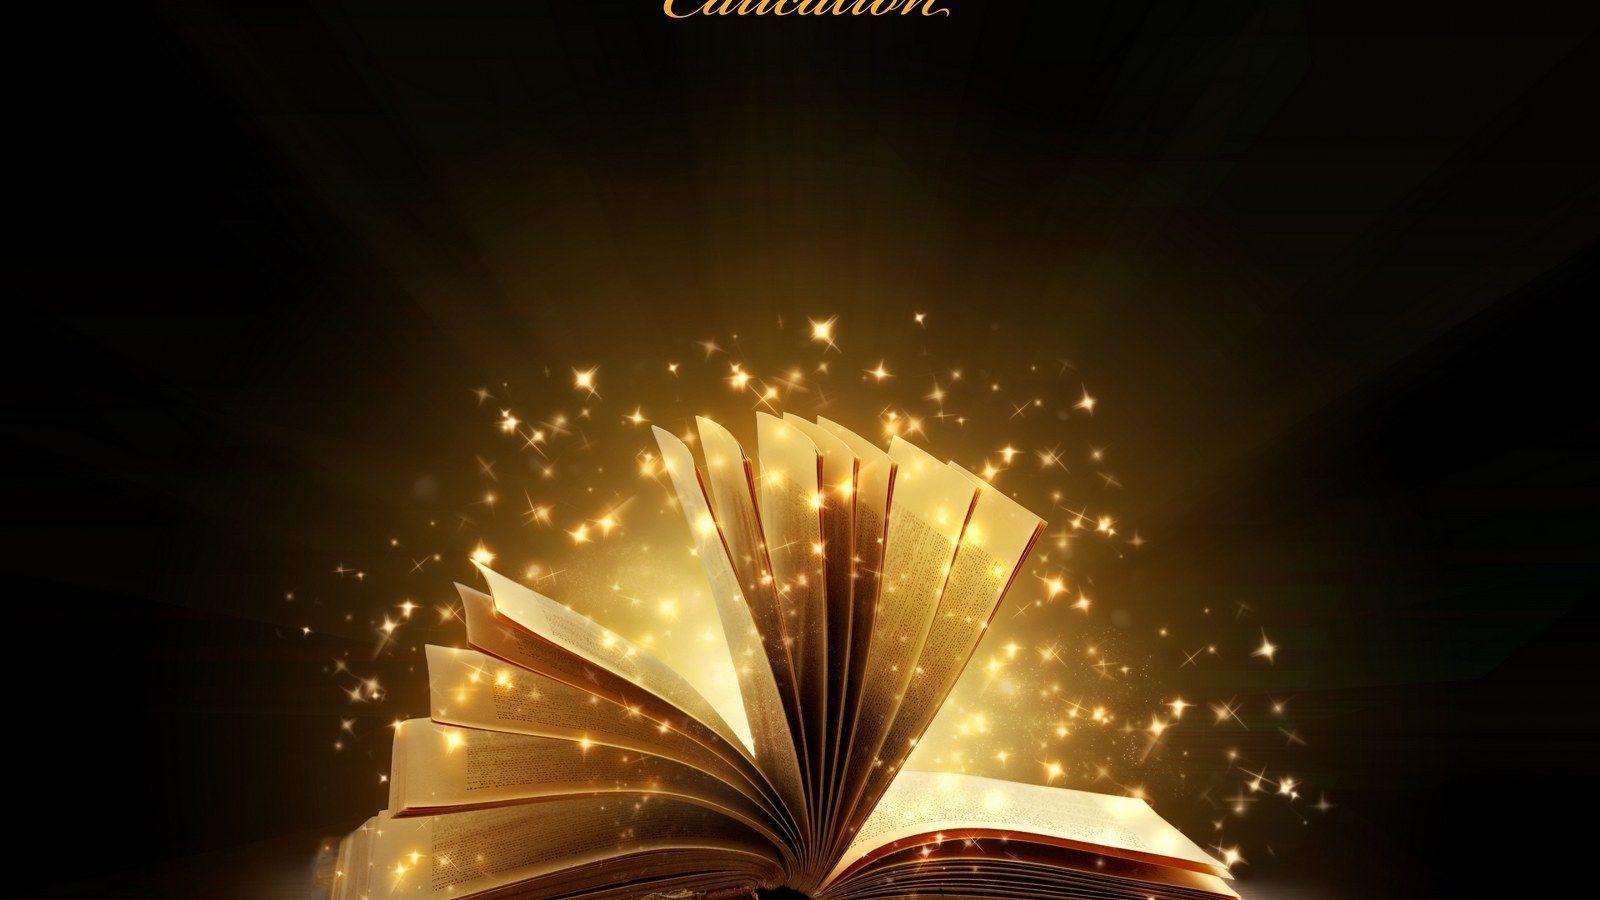 20 Reading HD Wallpapers and Backgrounds